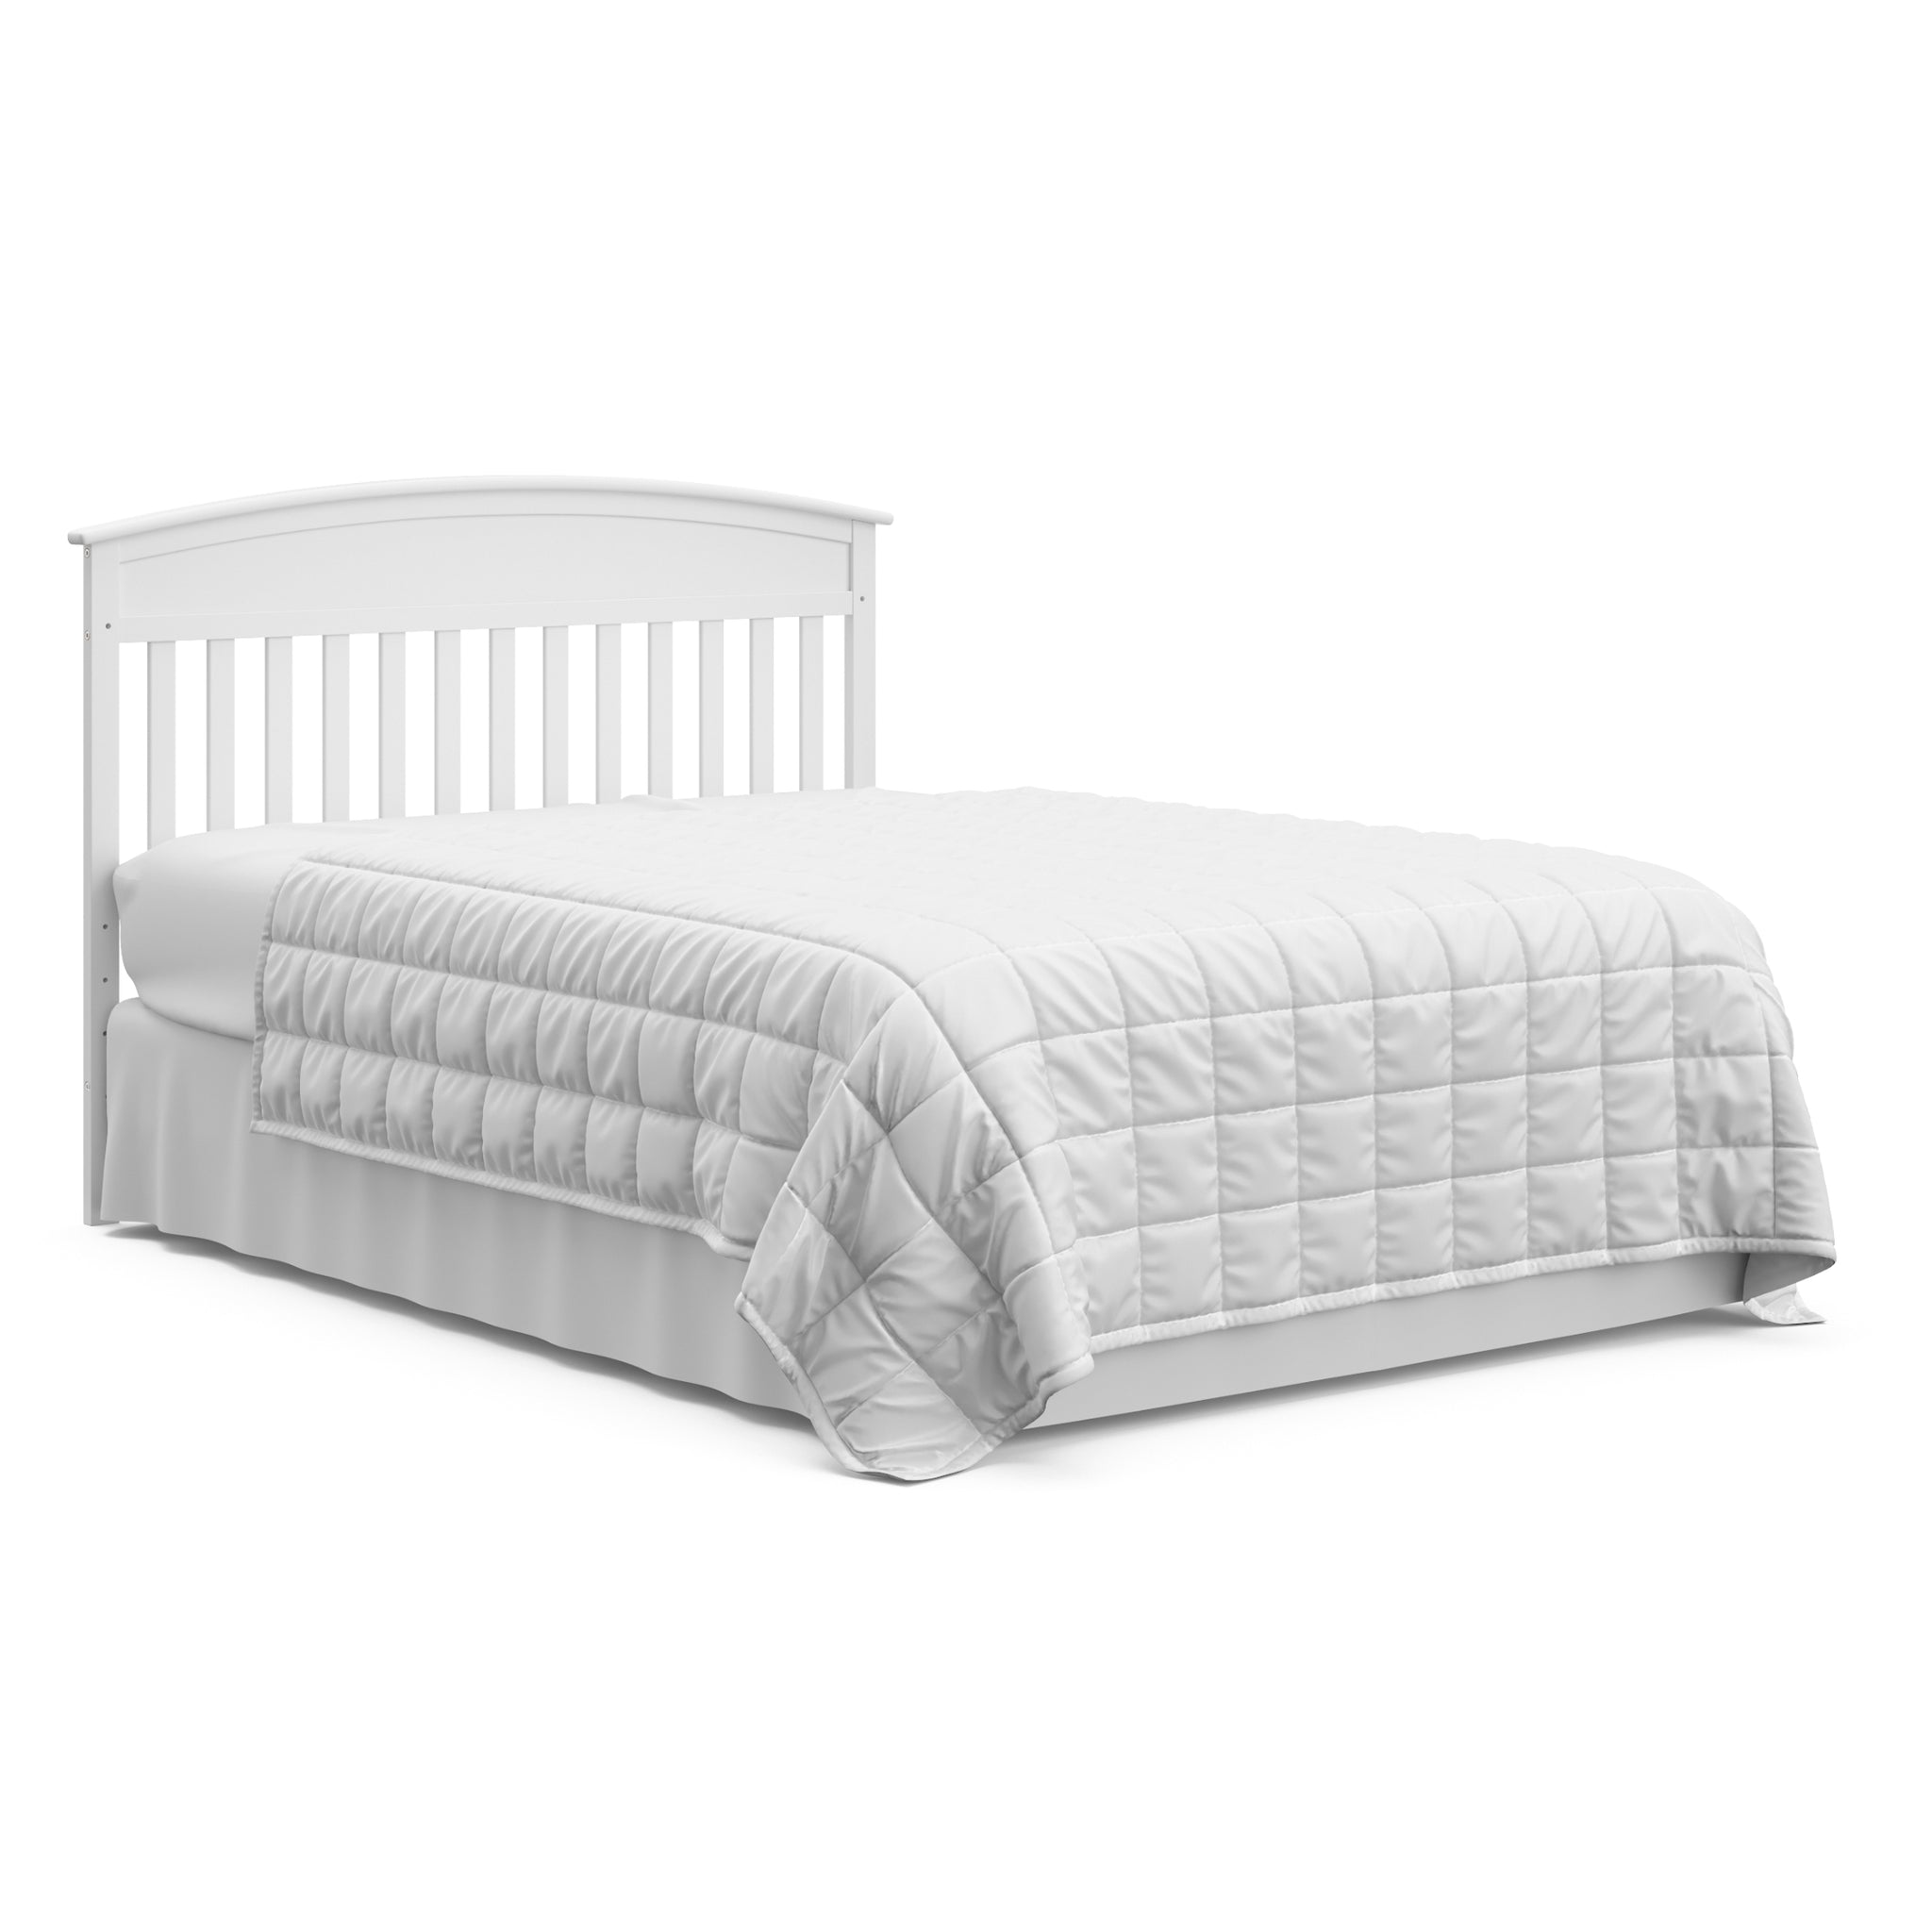 White crib in fullsize bed with headboard conversion